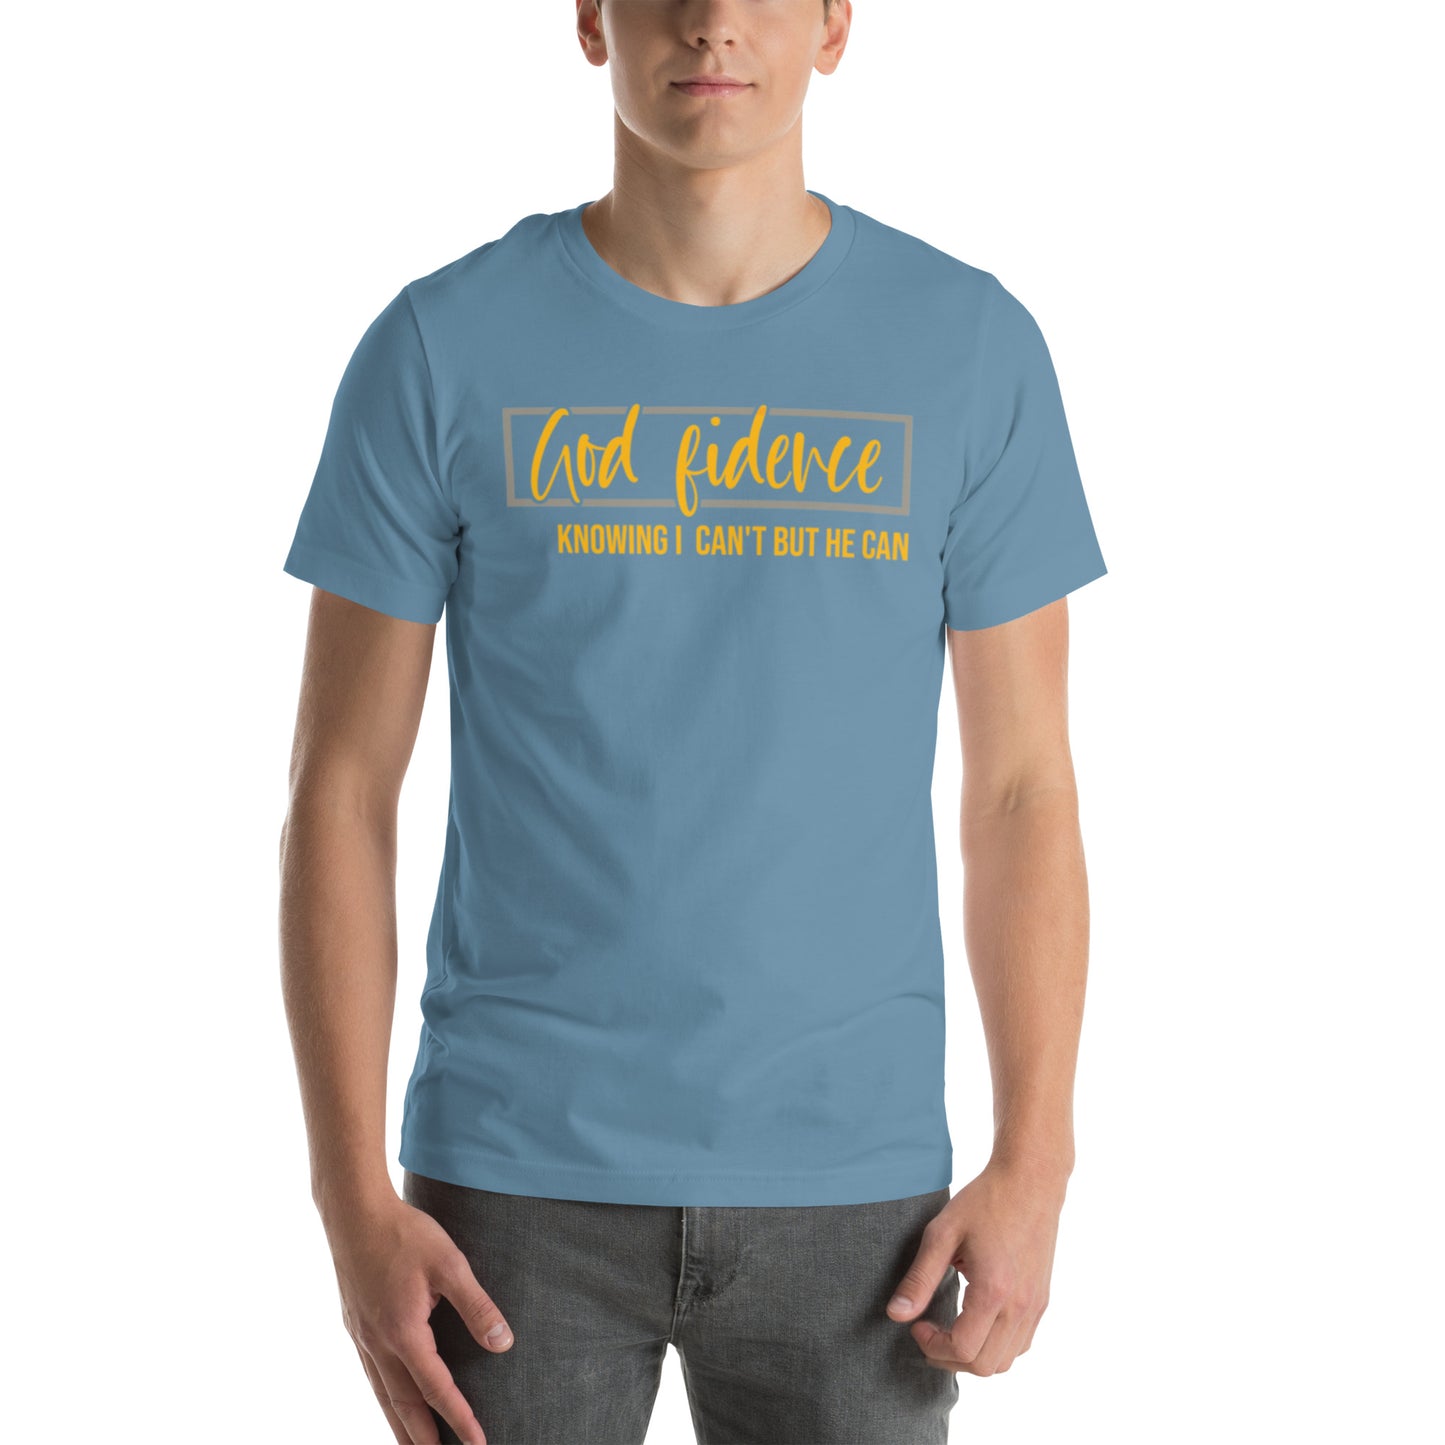 God fidence Knowing I Can't But He Can Unisex t-shirt